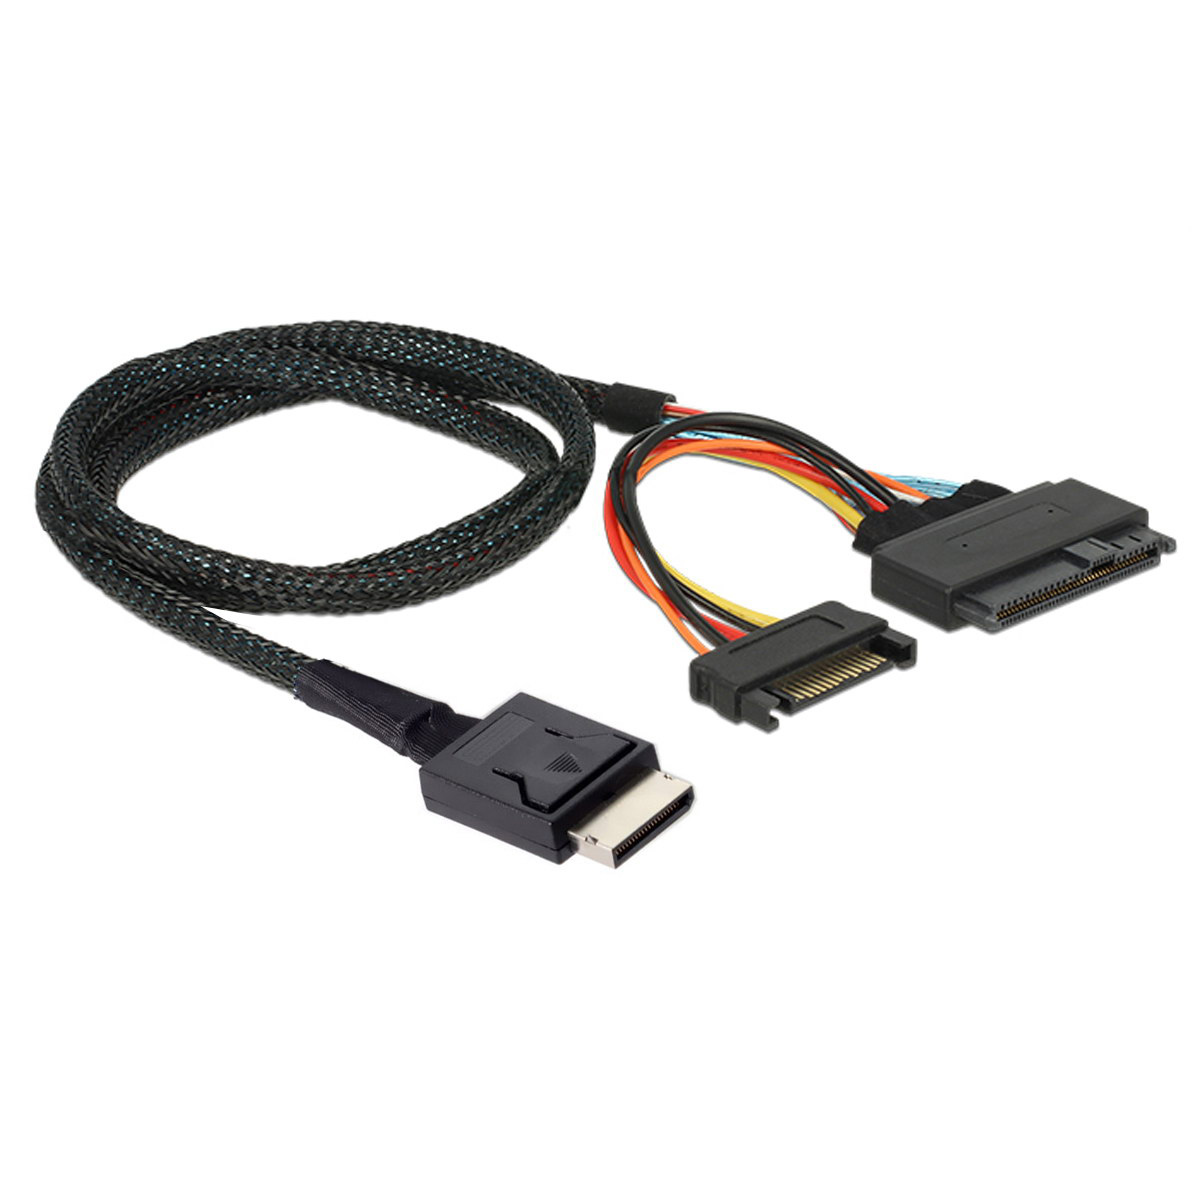 YIWENTEC Oculink Slimsas SFF-8611 to SFF-8639 U.2 U.3 NVME PCIe PCI-Express Cable for SSD with 15Pin SATA Power Cable G0108